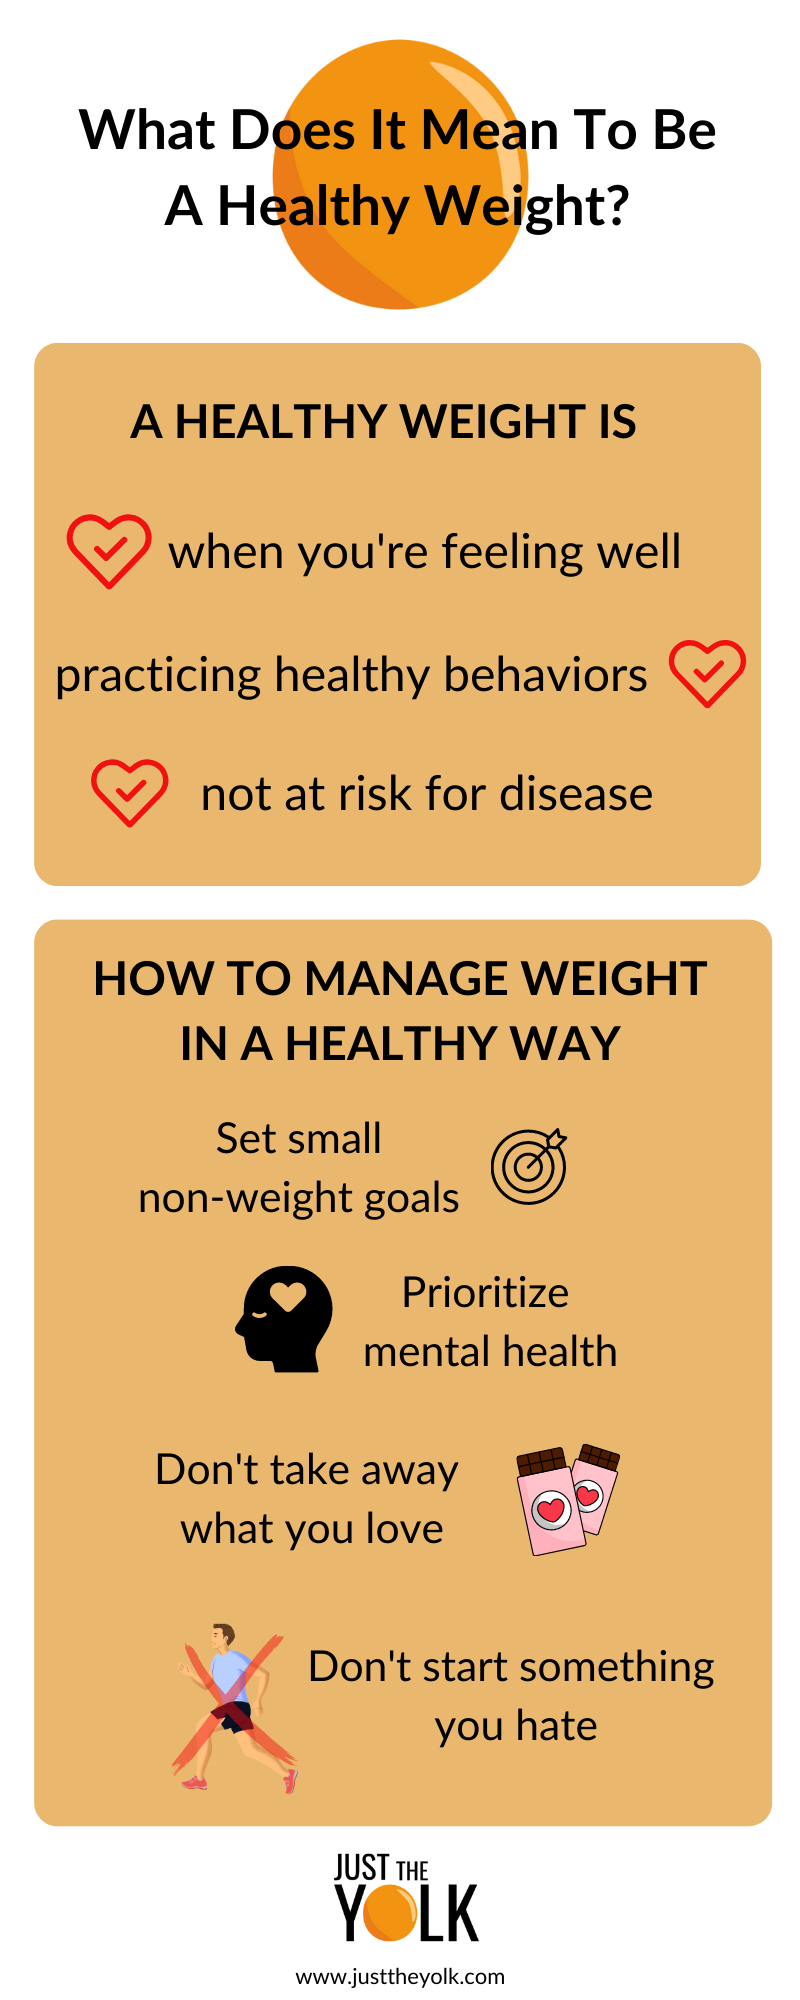 what does it mean to be a healthy weight?